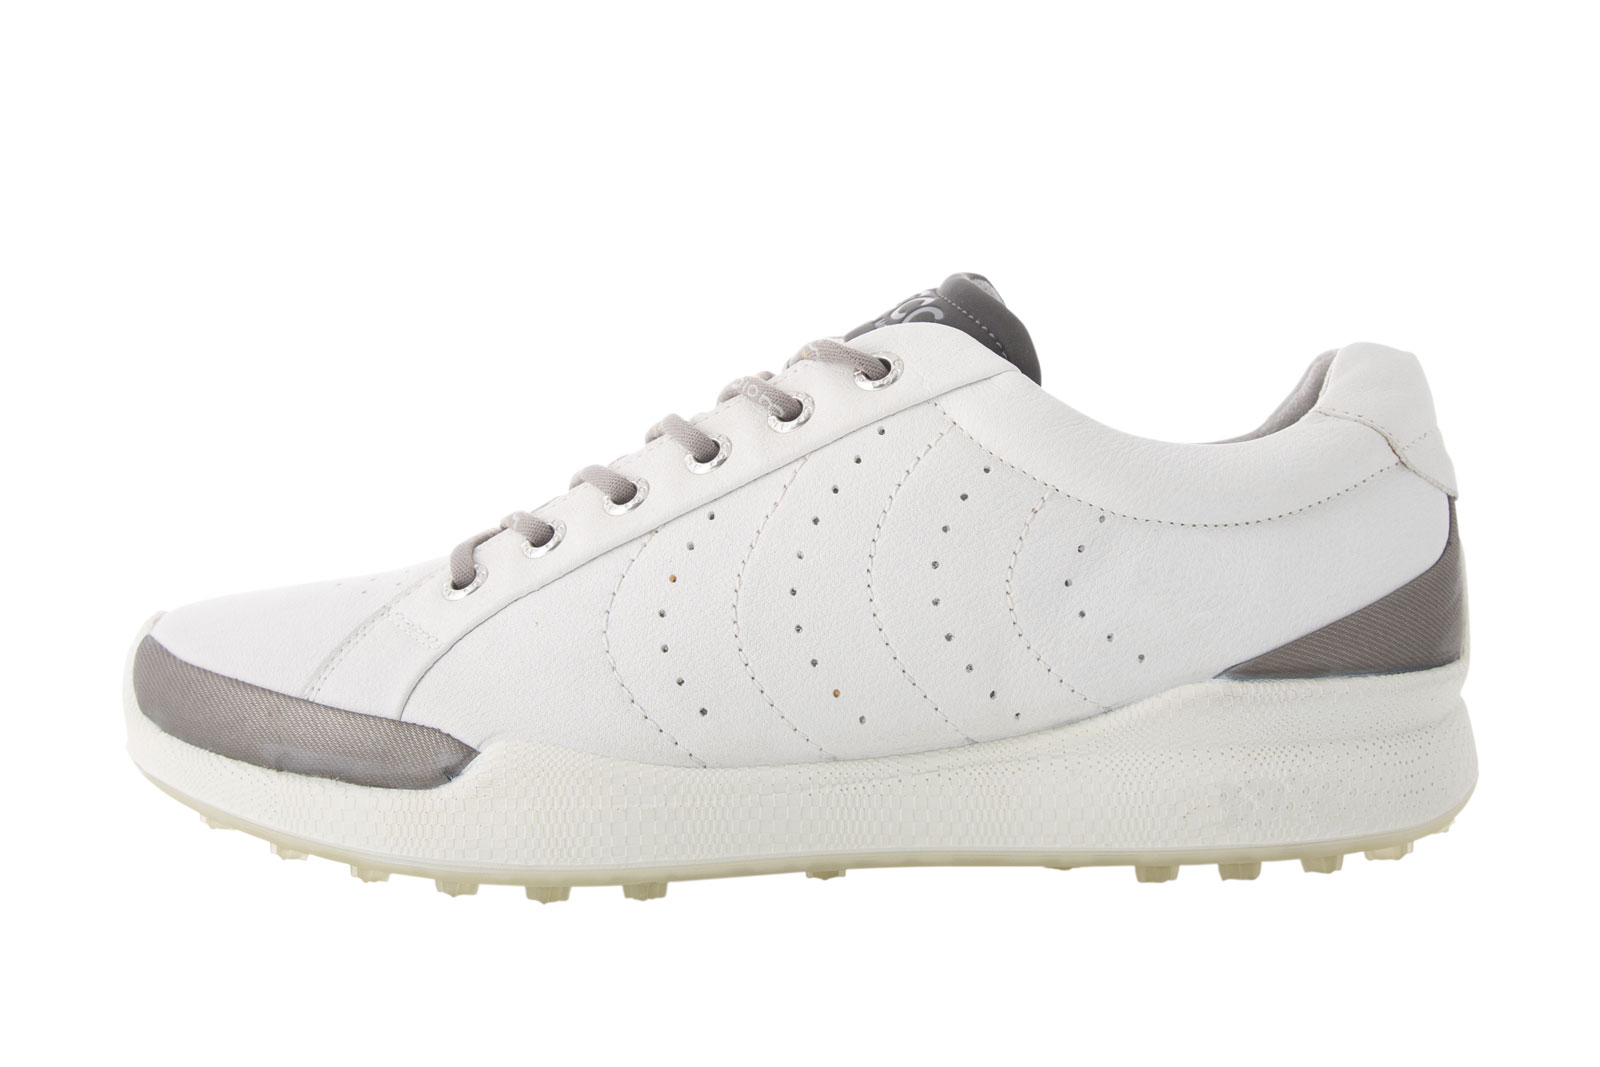 2012: ECCO GOLF BIOM HYBRID the first golf shoe with BIOM NATURAL MOTION technology